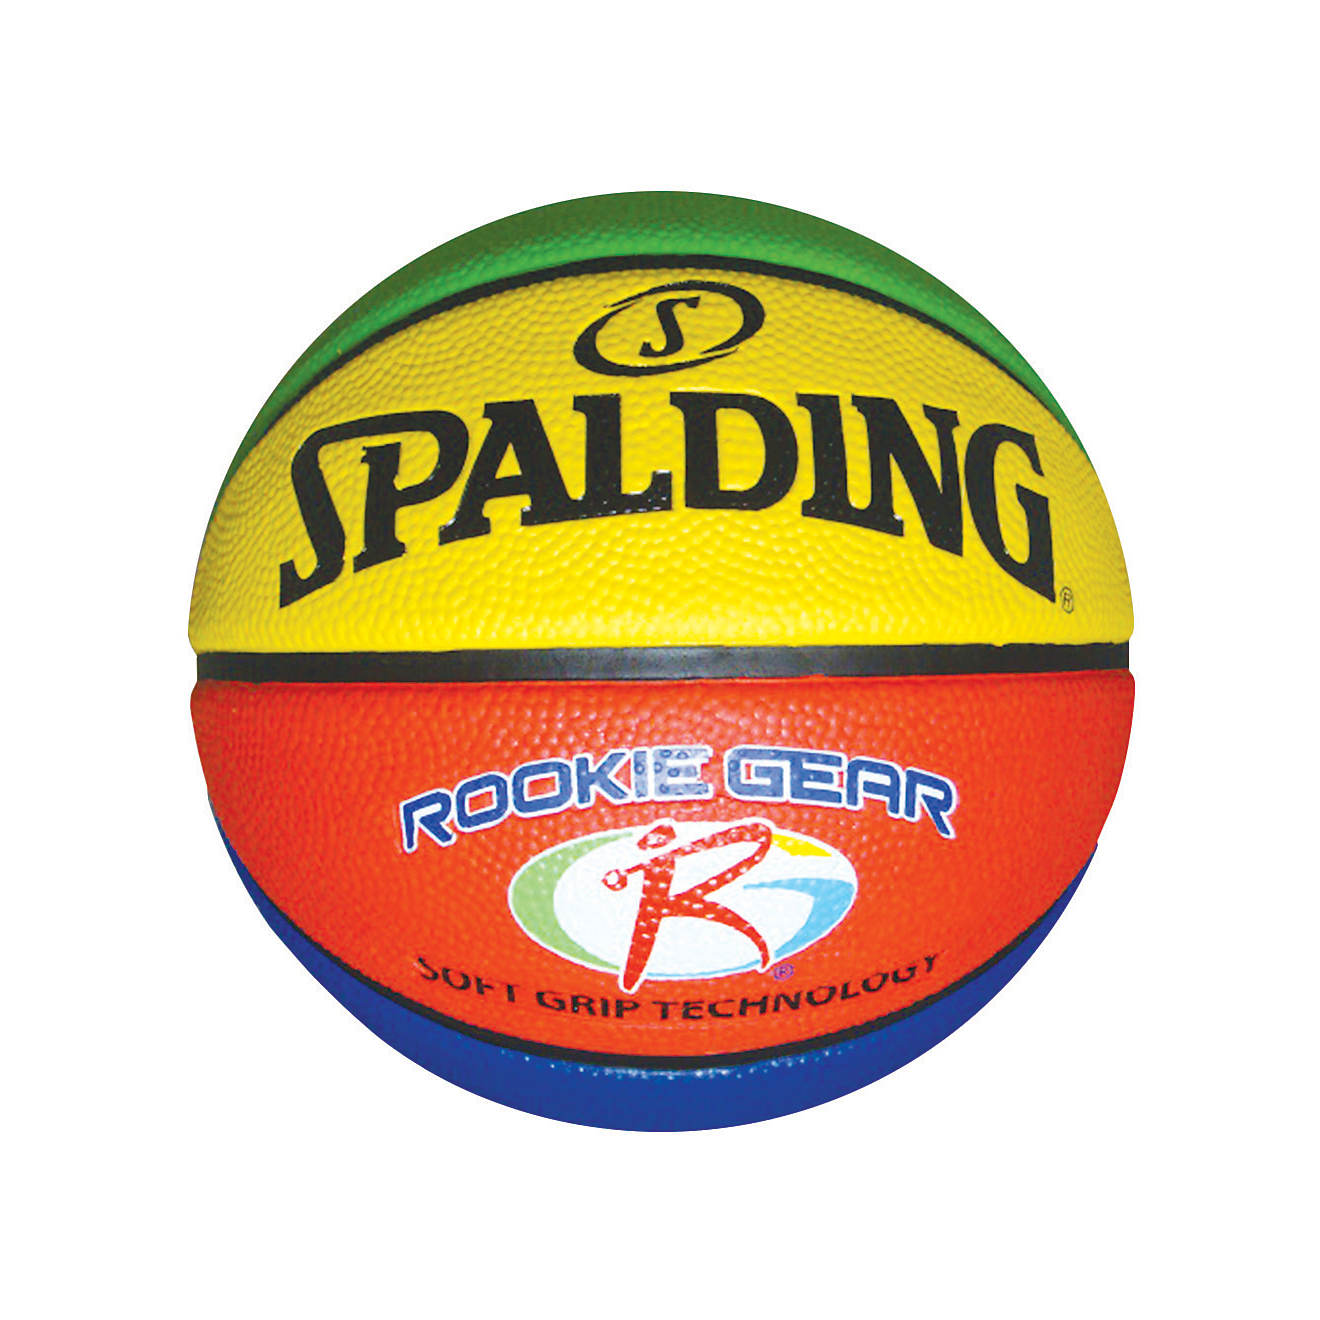 Spalding Rookie Gear Youth Indoor-Outdoor Basketball 